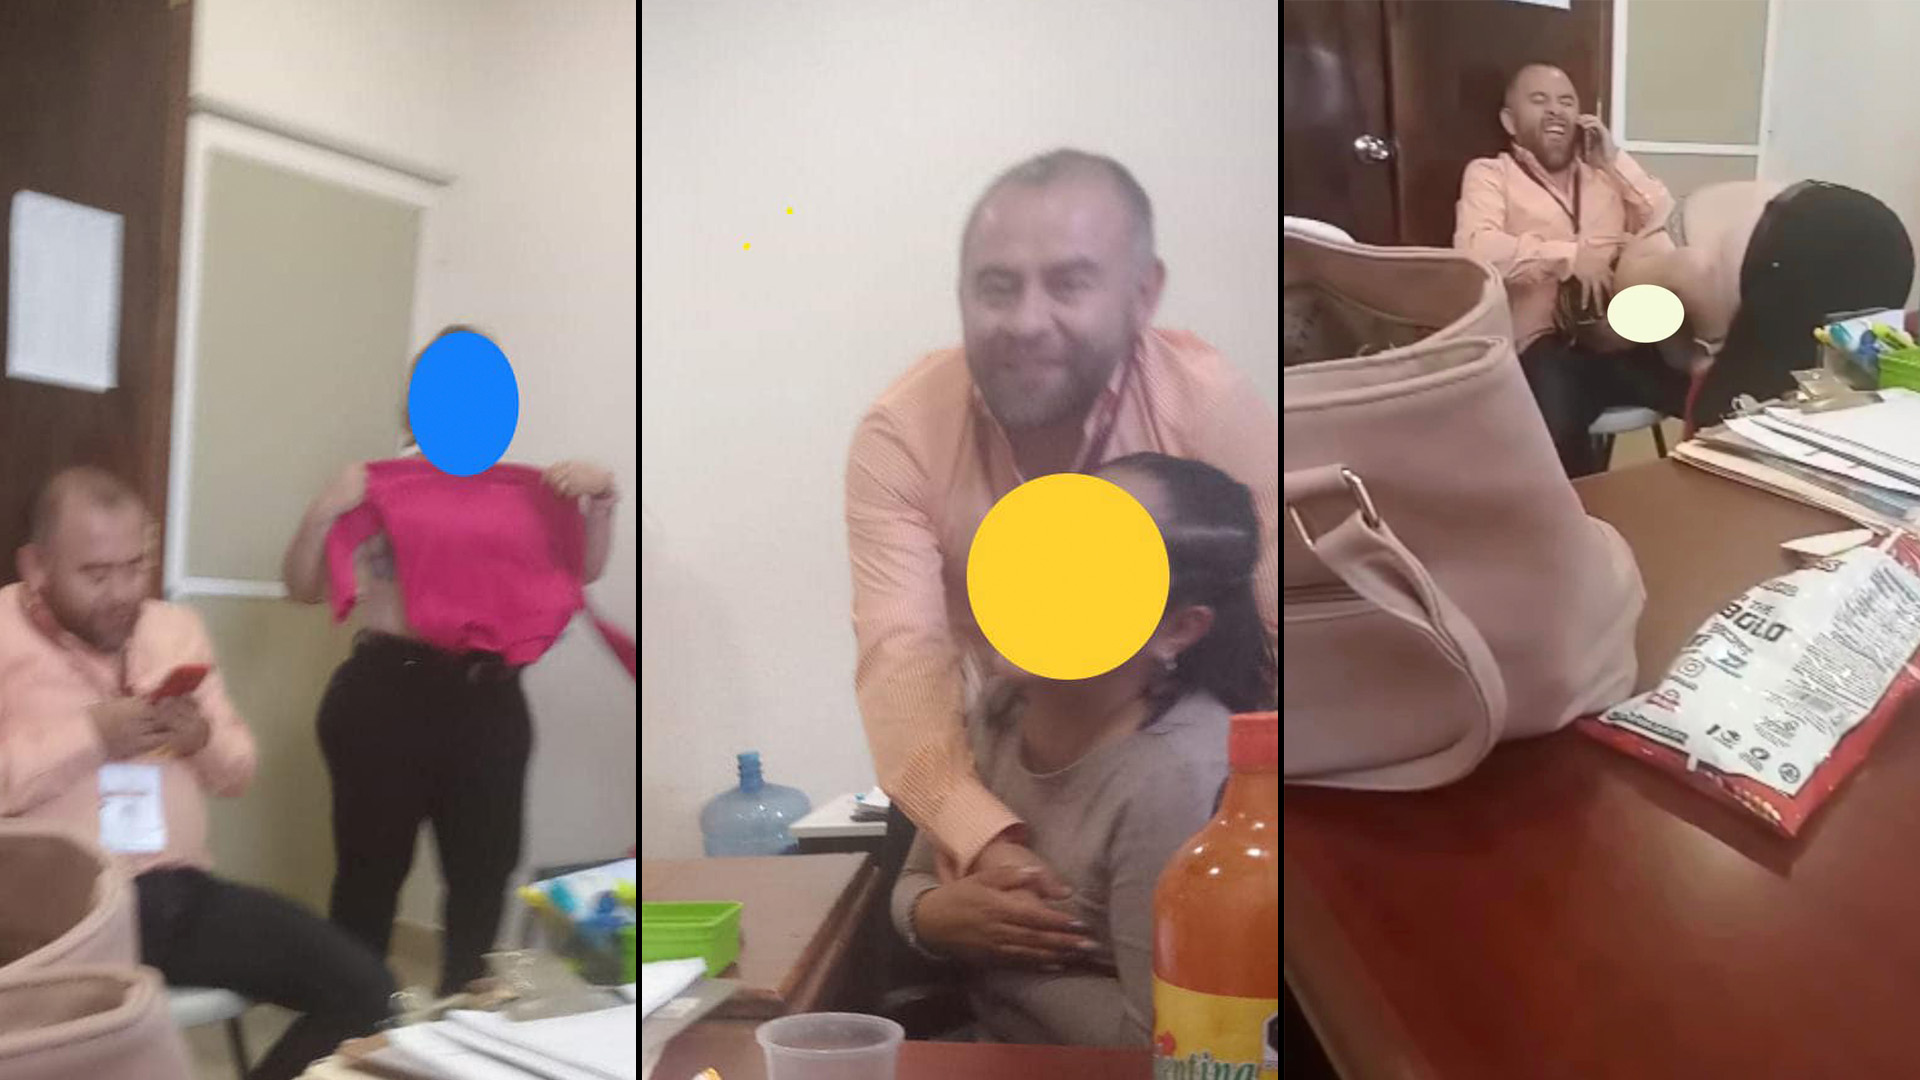 Public official of Tecámac accused of practicing alleged sexual acts in his office (Photo: Facebook/ Mariela Gutiérrez)